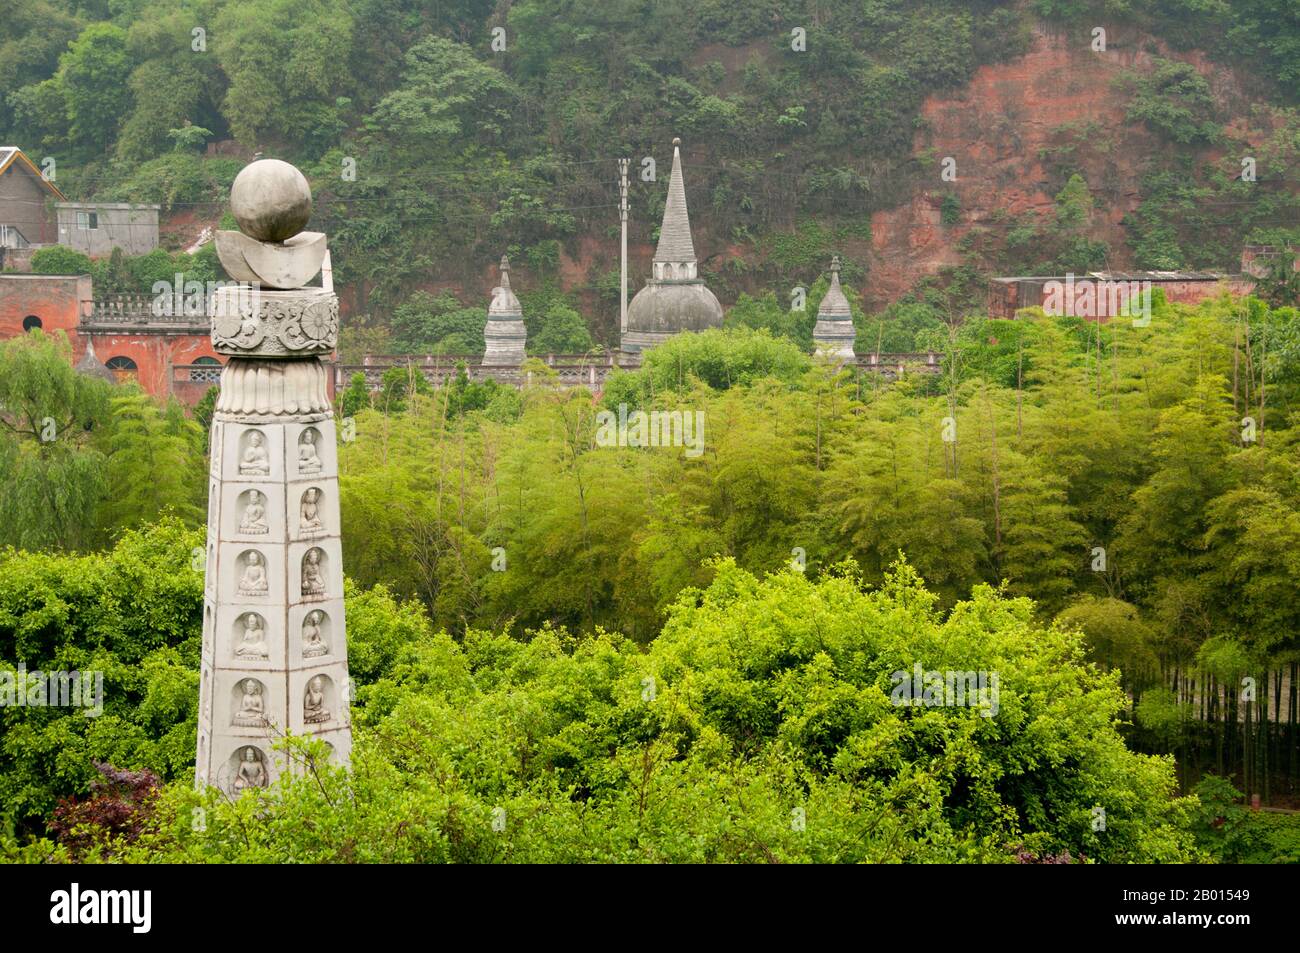 China: Stupas, Lingyun Shan (Towering Cloud Hill), Leshan, Sichuan Province.  The Oriental Buddha Park, close to Leshan's famous Grand Buddha (Da Fo), contains a varied collection of Buddha statues from all across Asia. Stock Photo